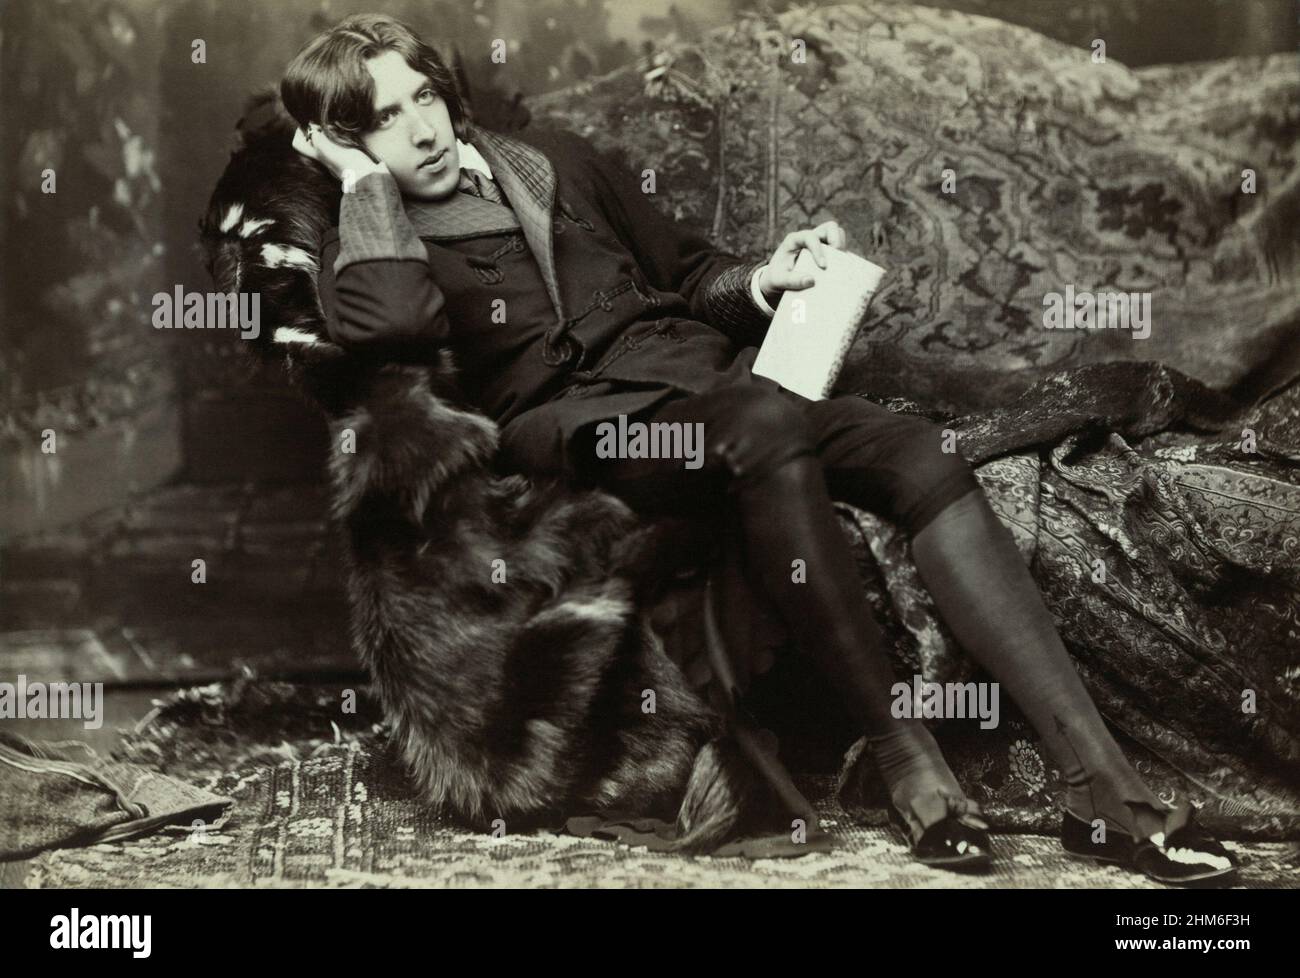 A portrait of the Irish write, poet and playwright Oscar Wilde from 1882 when he was 28 yrs old Stock Photo